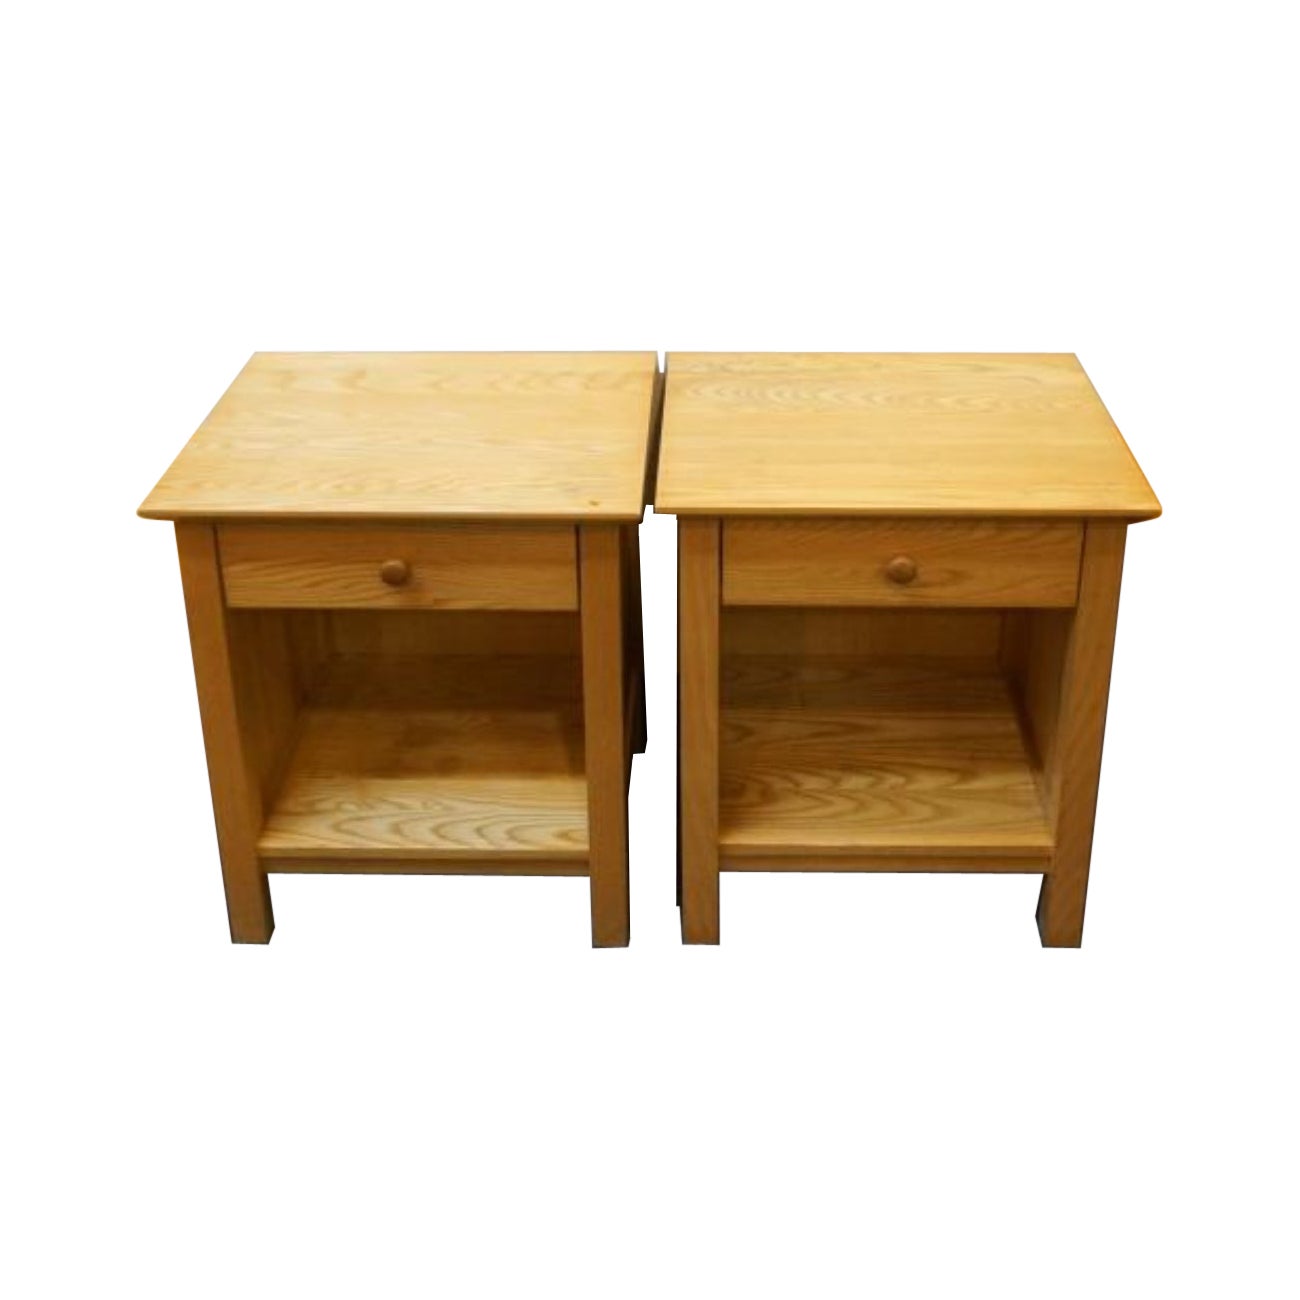 Vermont Tubbs Solid Oak Single Drawer Bedside Tables Nightstands, a Pair